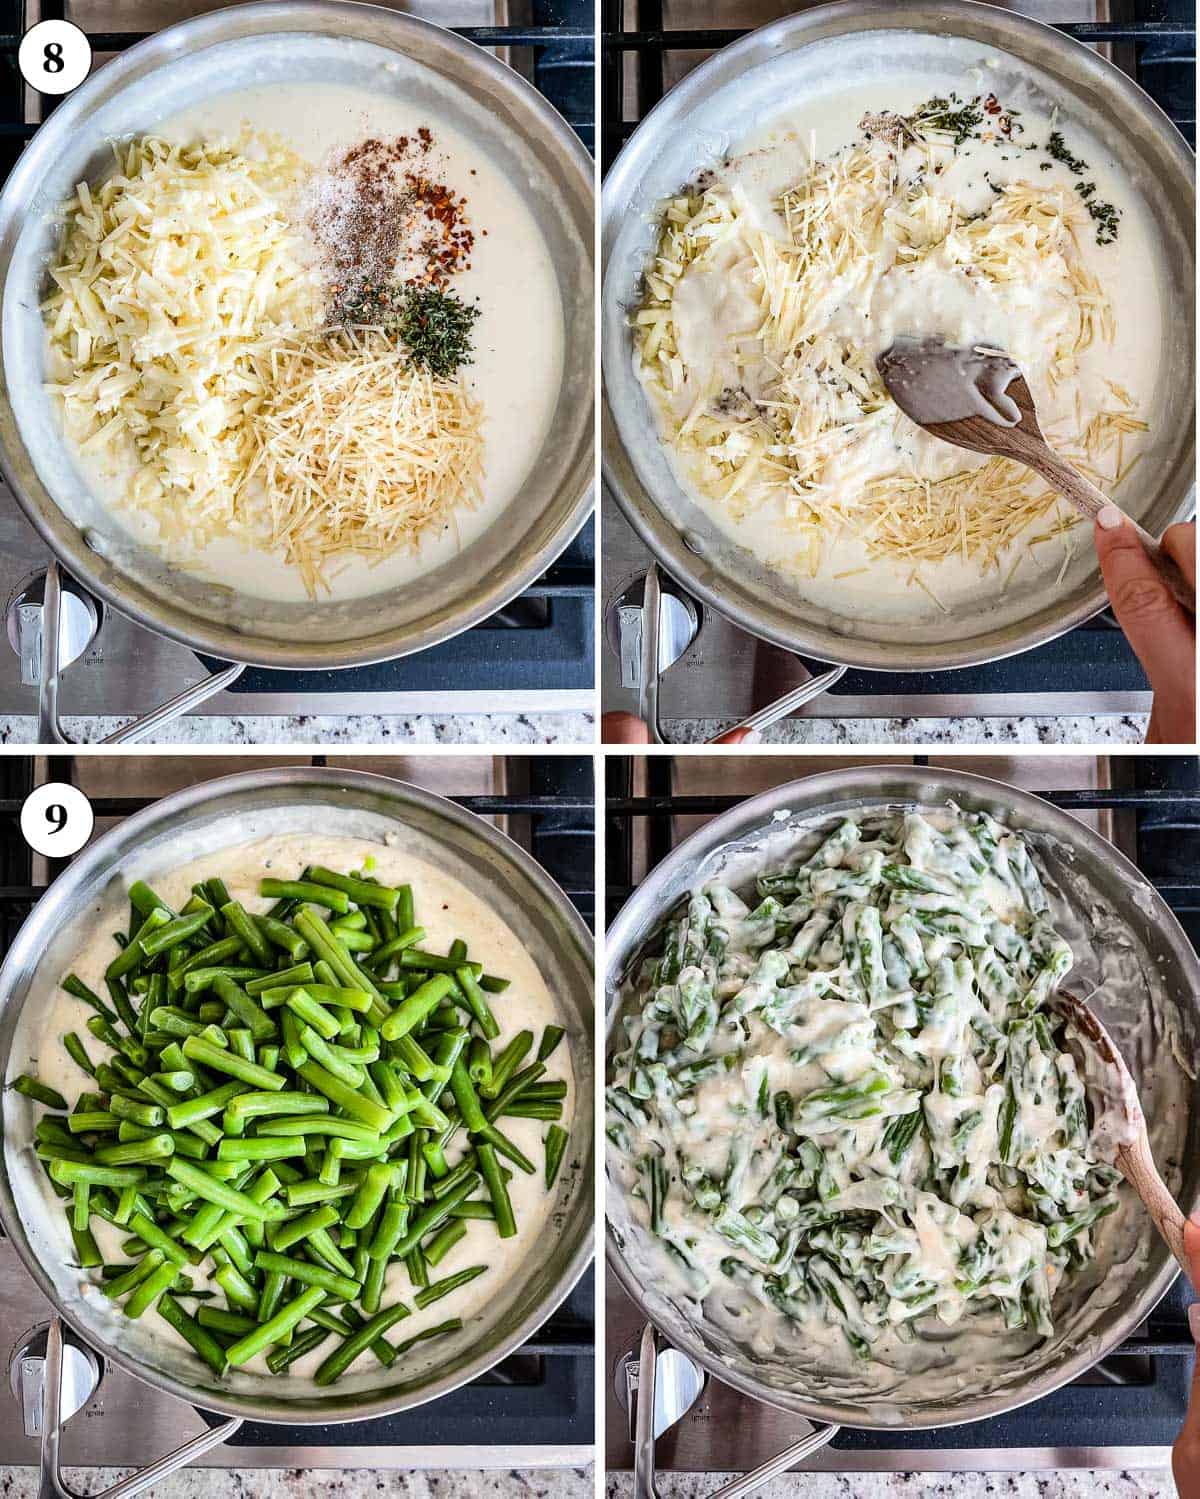 Step by step images showing how to mix the sauce with green beans to make no mushroom string bean casserole recipe.